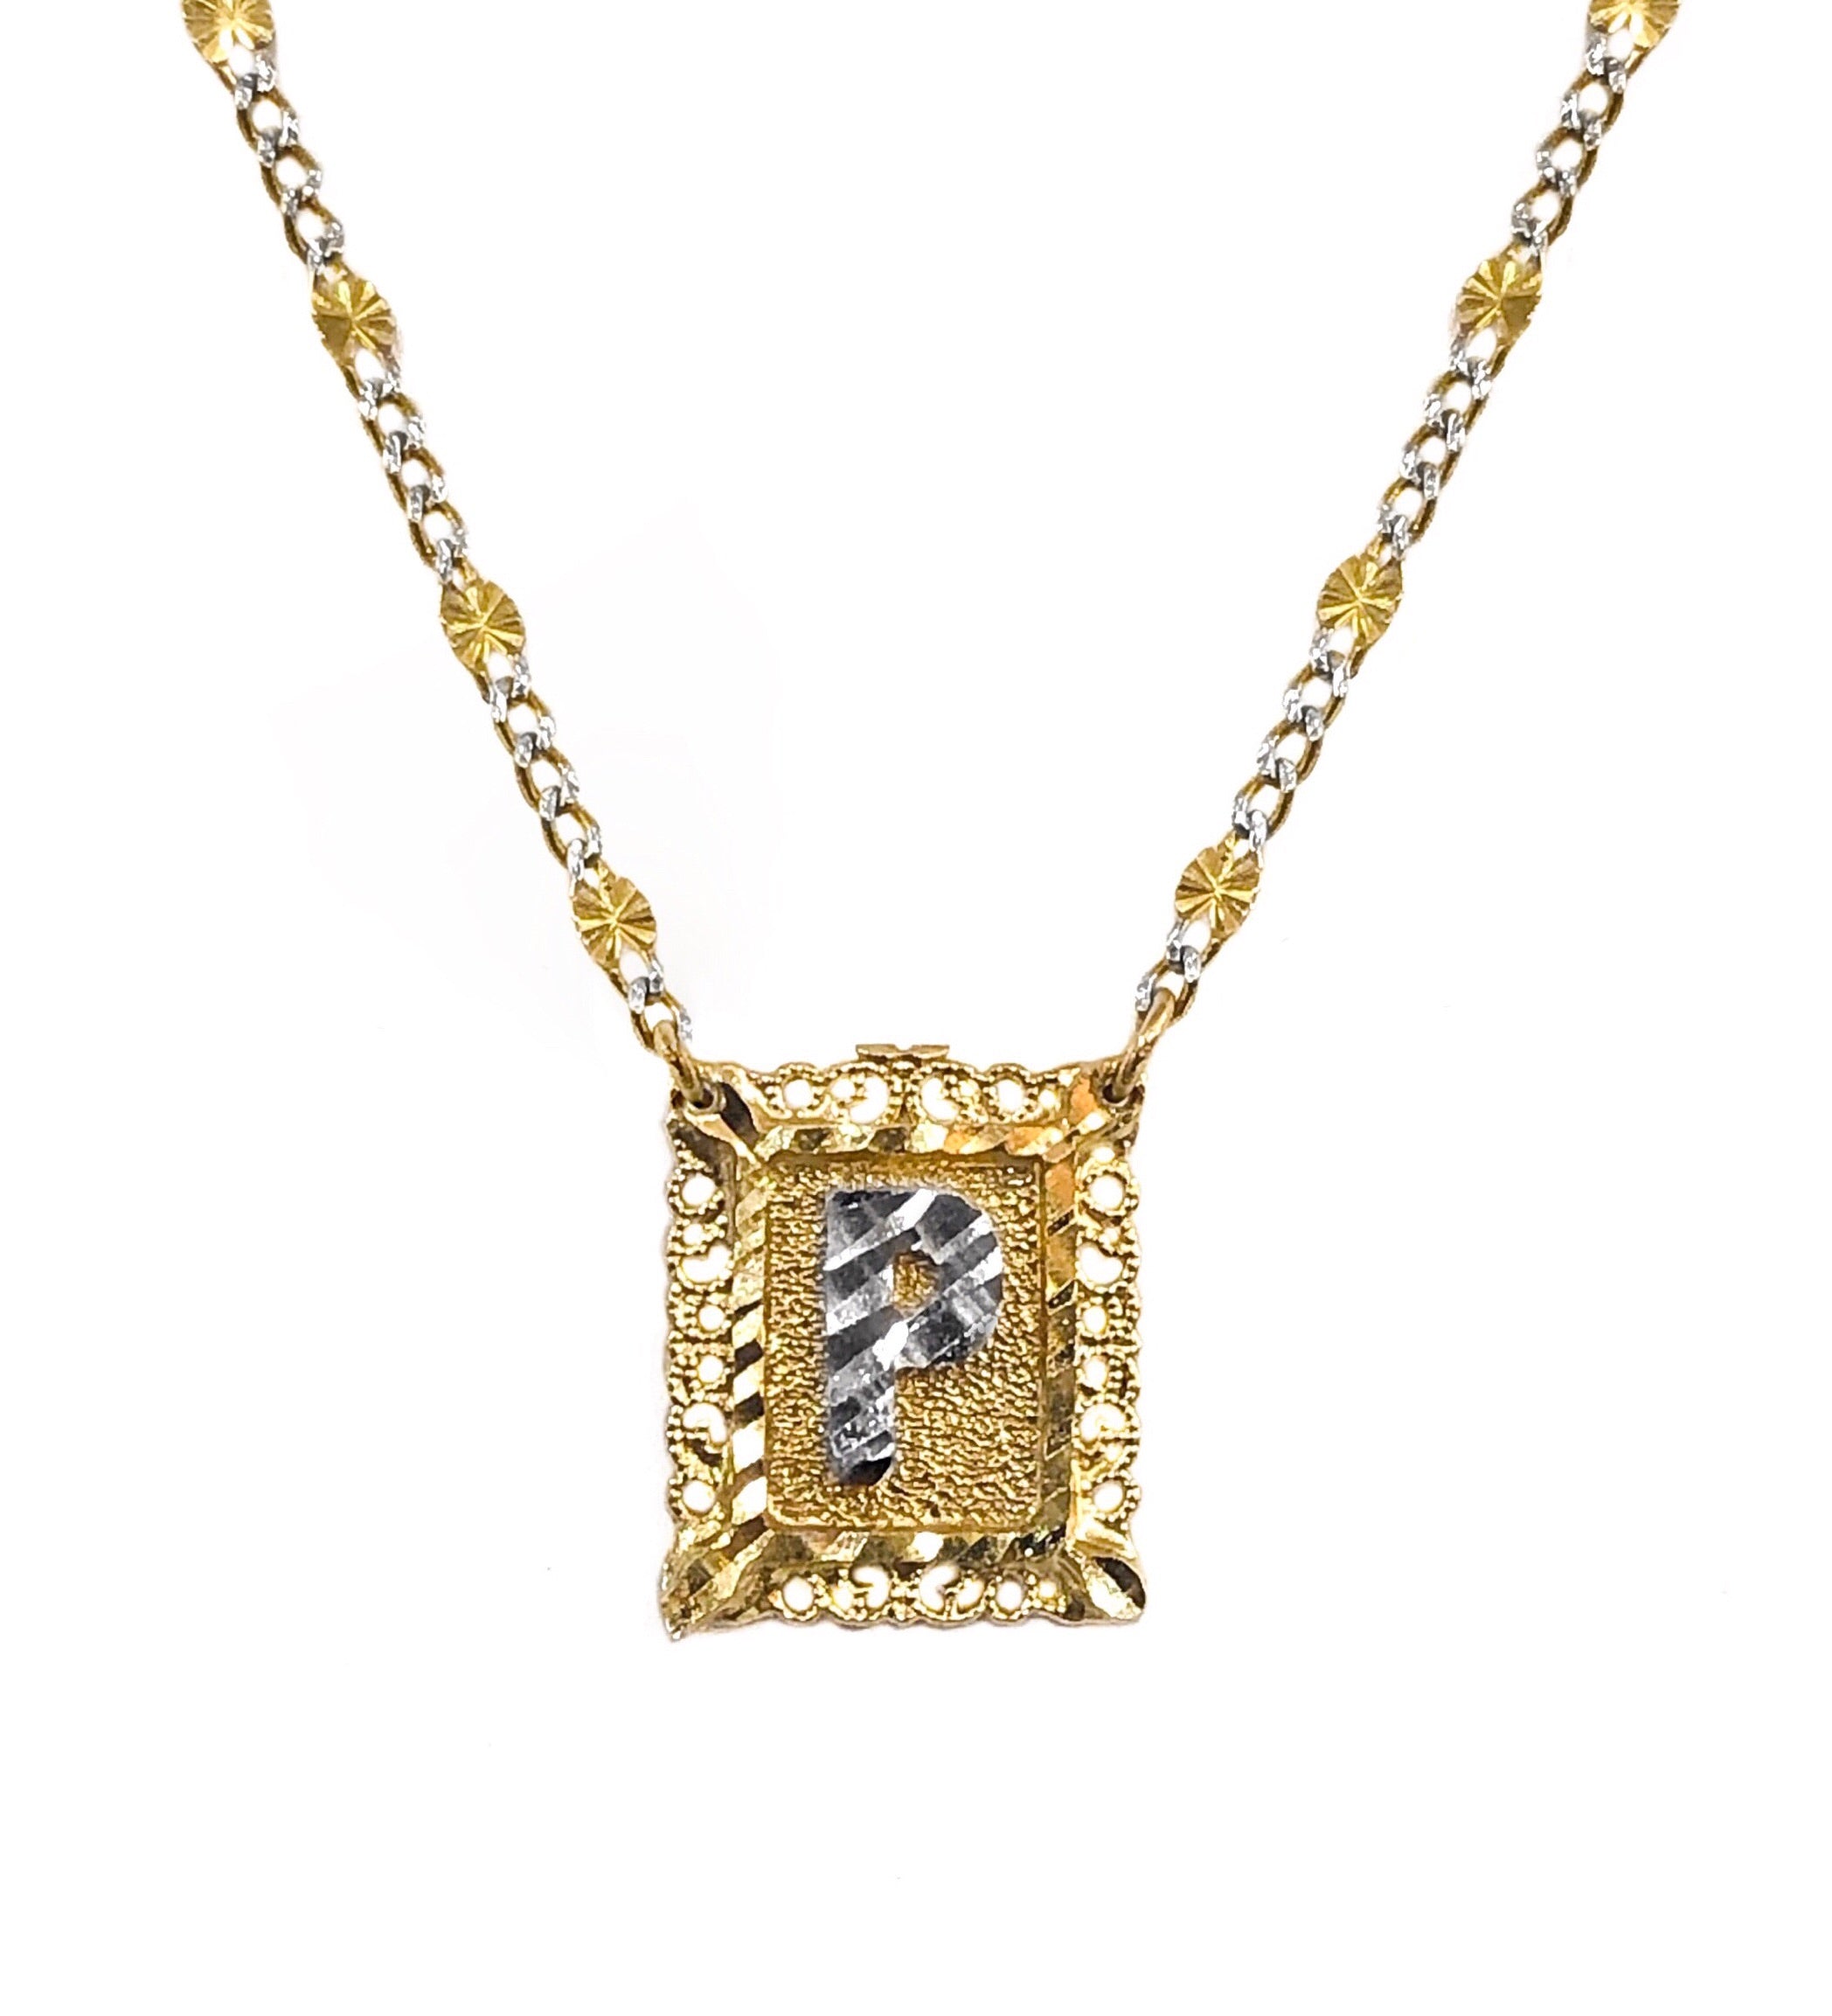 14K YELLOW GOLD FLOATING FILIGREE STAMP INITIAL NECKLACE